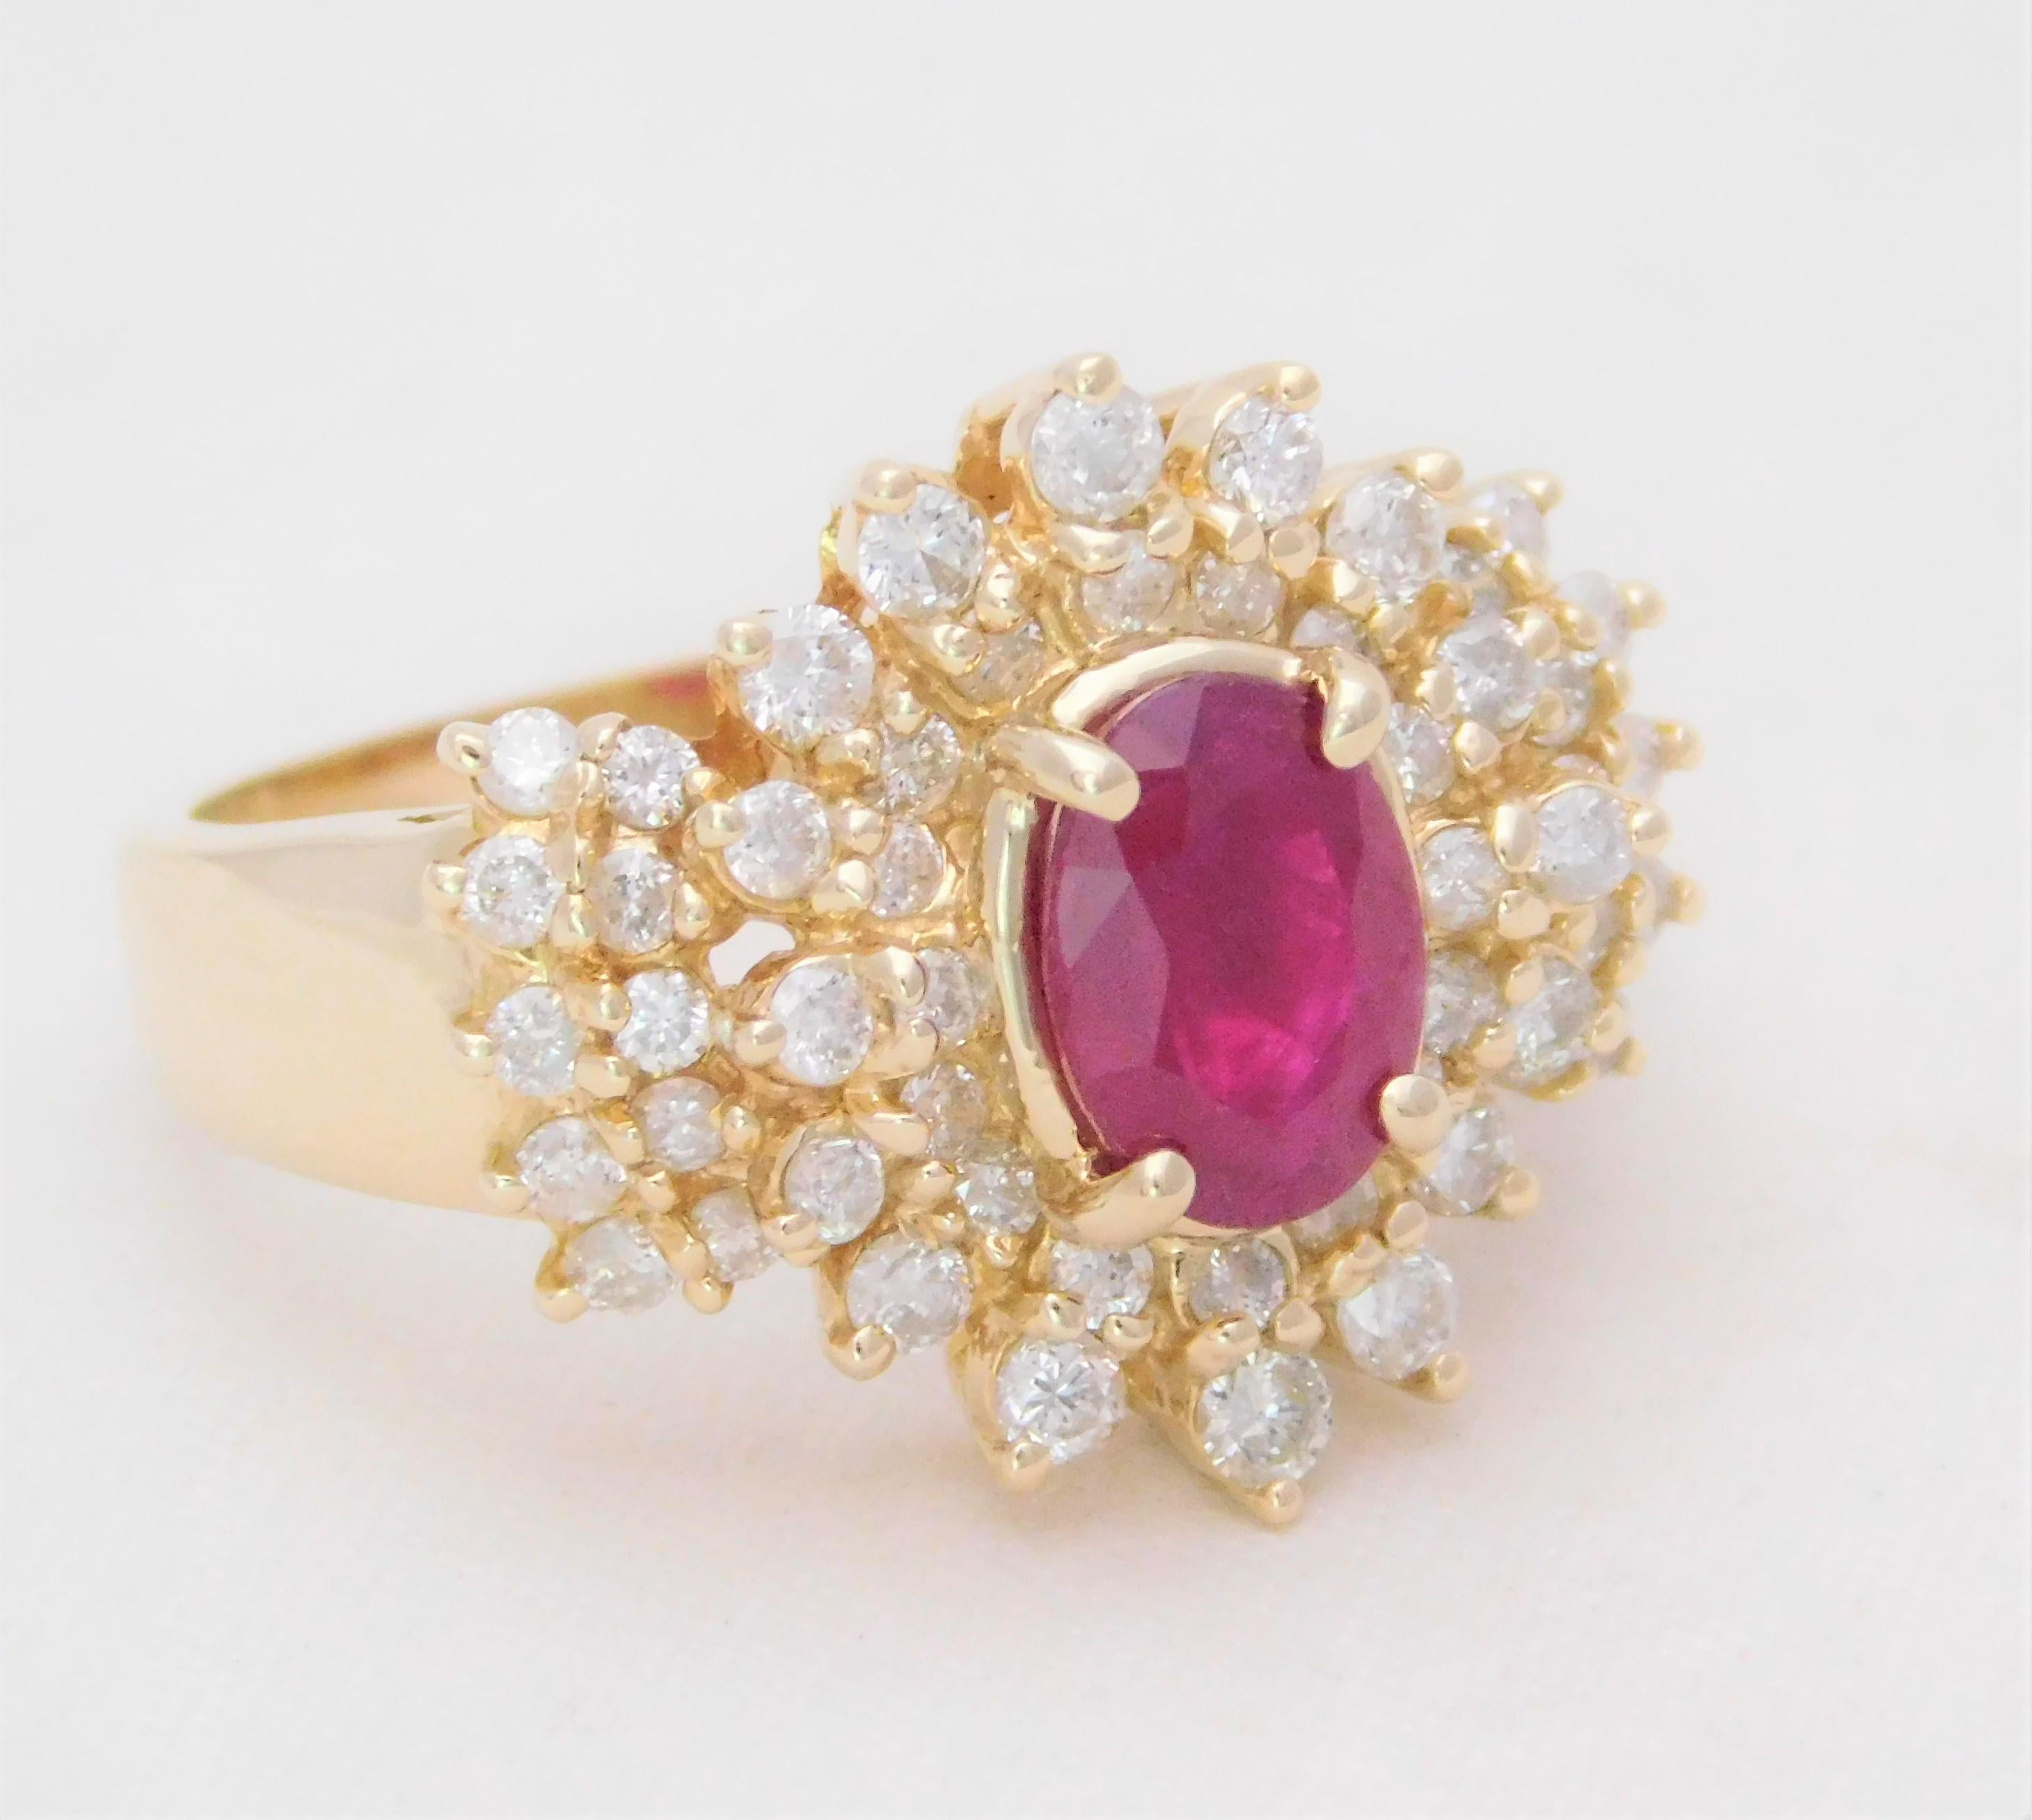 The fiery and captivating Ruby is a stone of nobility, considered the most magnificent of all gems, the queen of stones and the stone of kings. Ancients believed it surpassed all other precious stones in virtue, and its value exceeded even that of